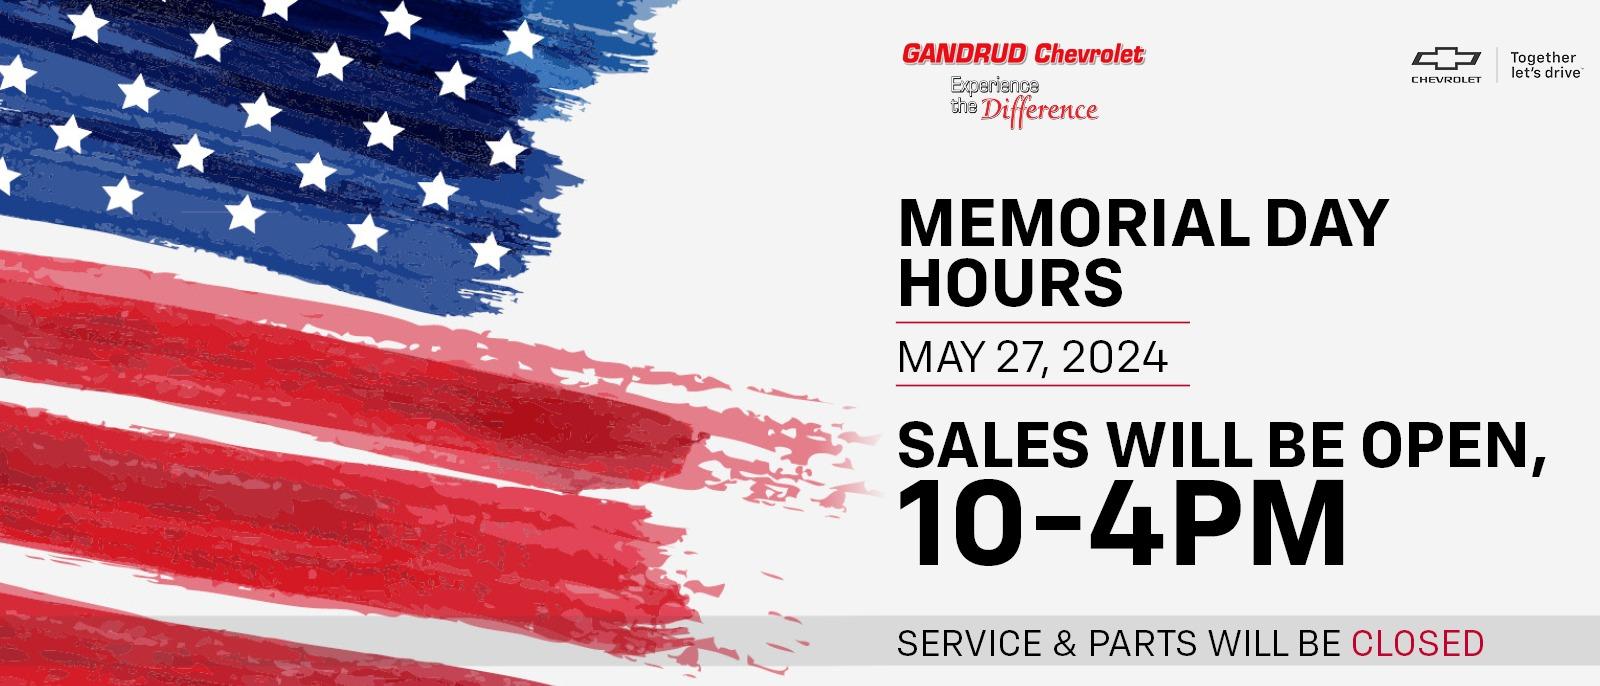 Memorial Day Hours - May 27, 2024 Sales Will be Open 10-4PM - Service & Parts will be CLOSED